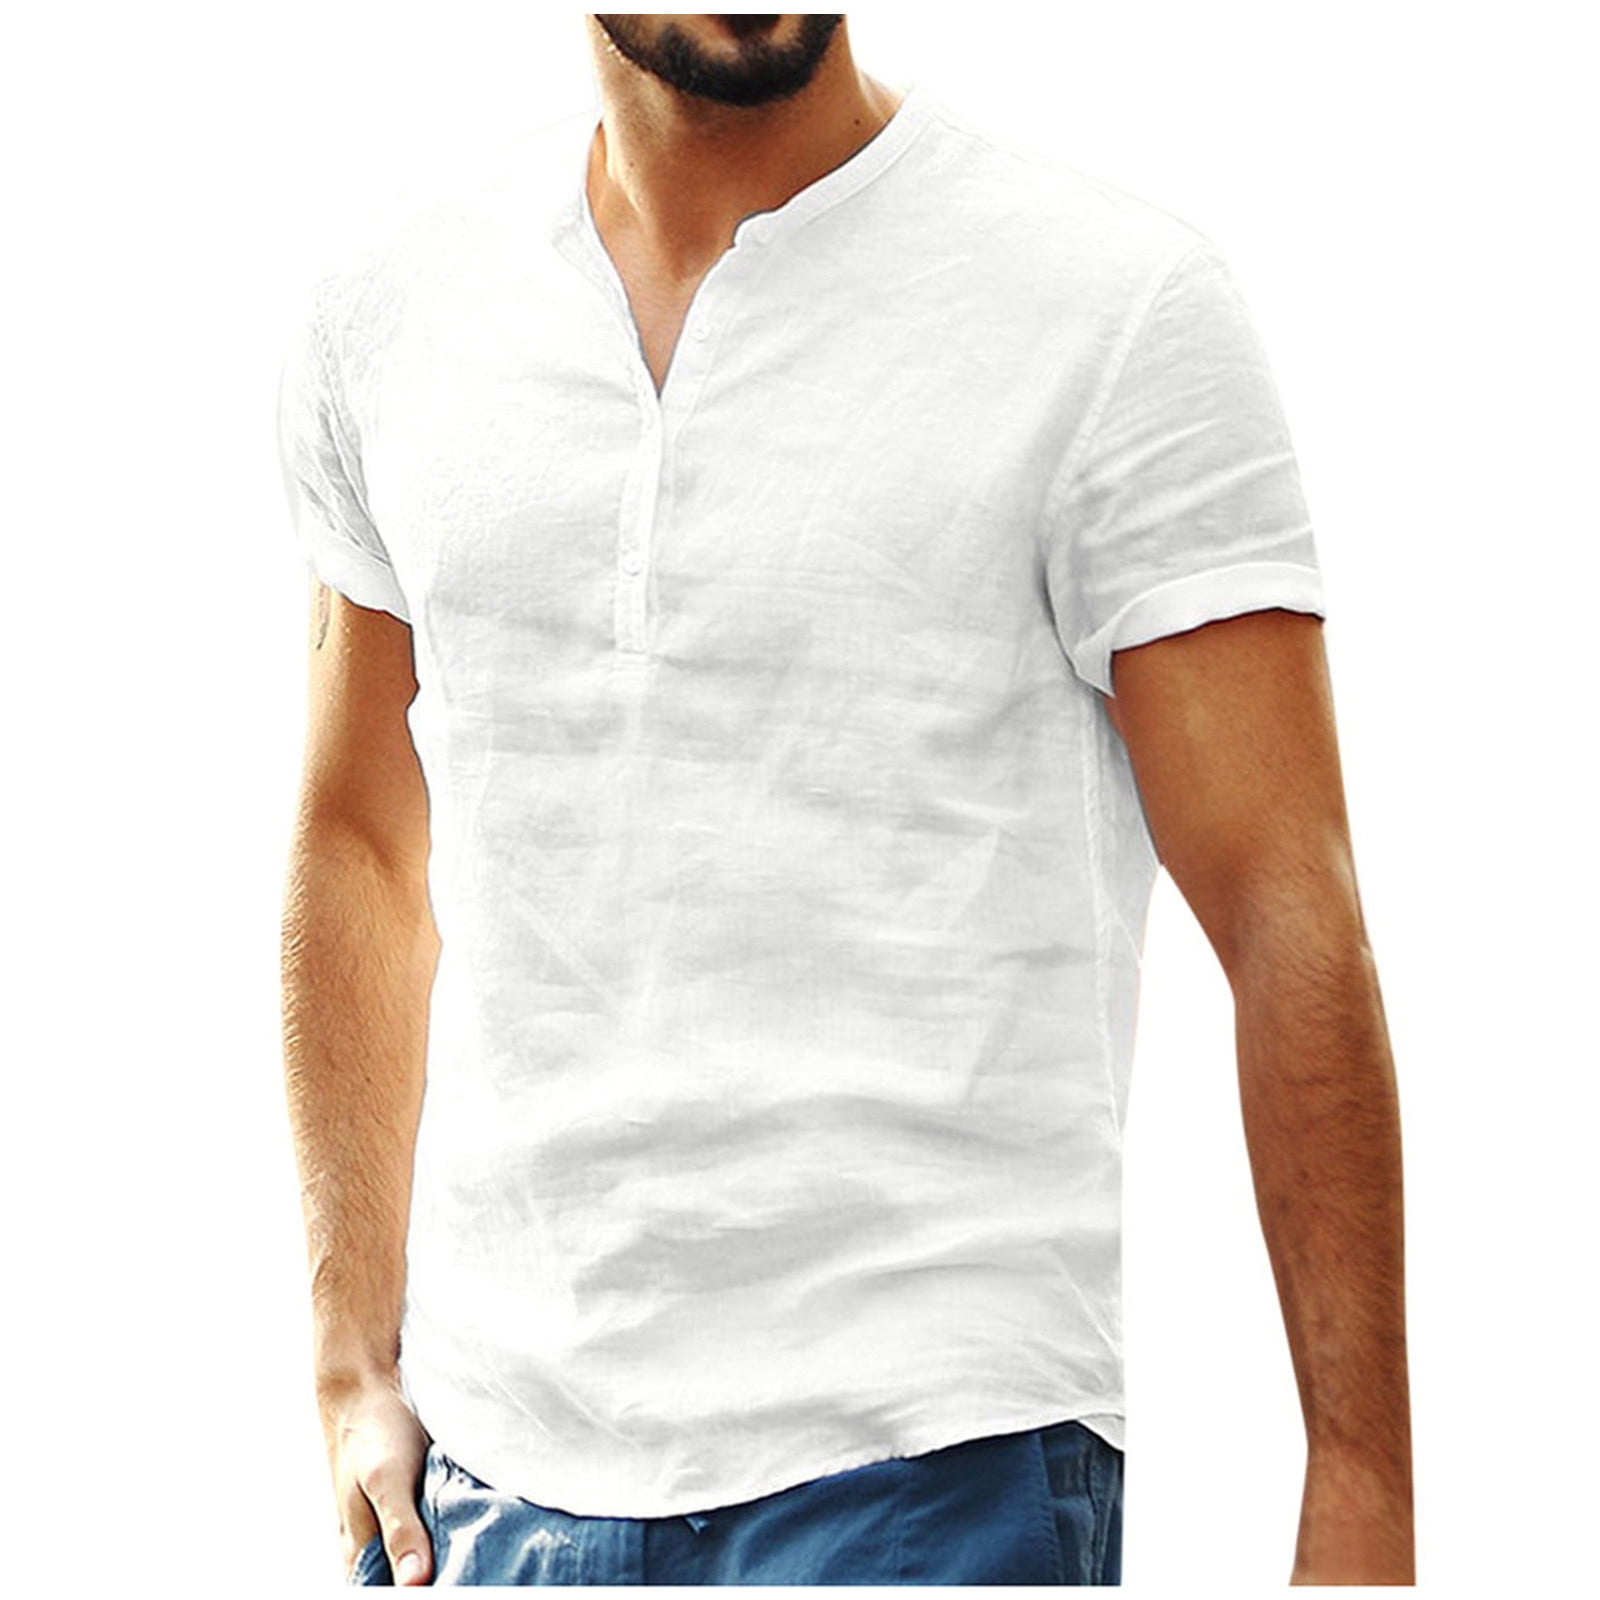 Huk Fishing Shirts For Men White T Shirts for Men Men's Baggy Cotton And  Linen Solid Short Sleeve V-Neck T-Shirts Tops Blouse Cotton tshirts for Men  Men'S Undershirts,White,L 